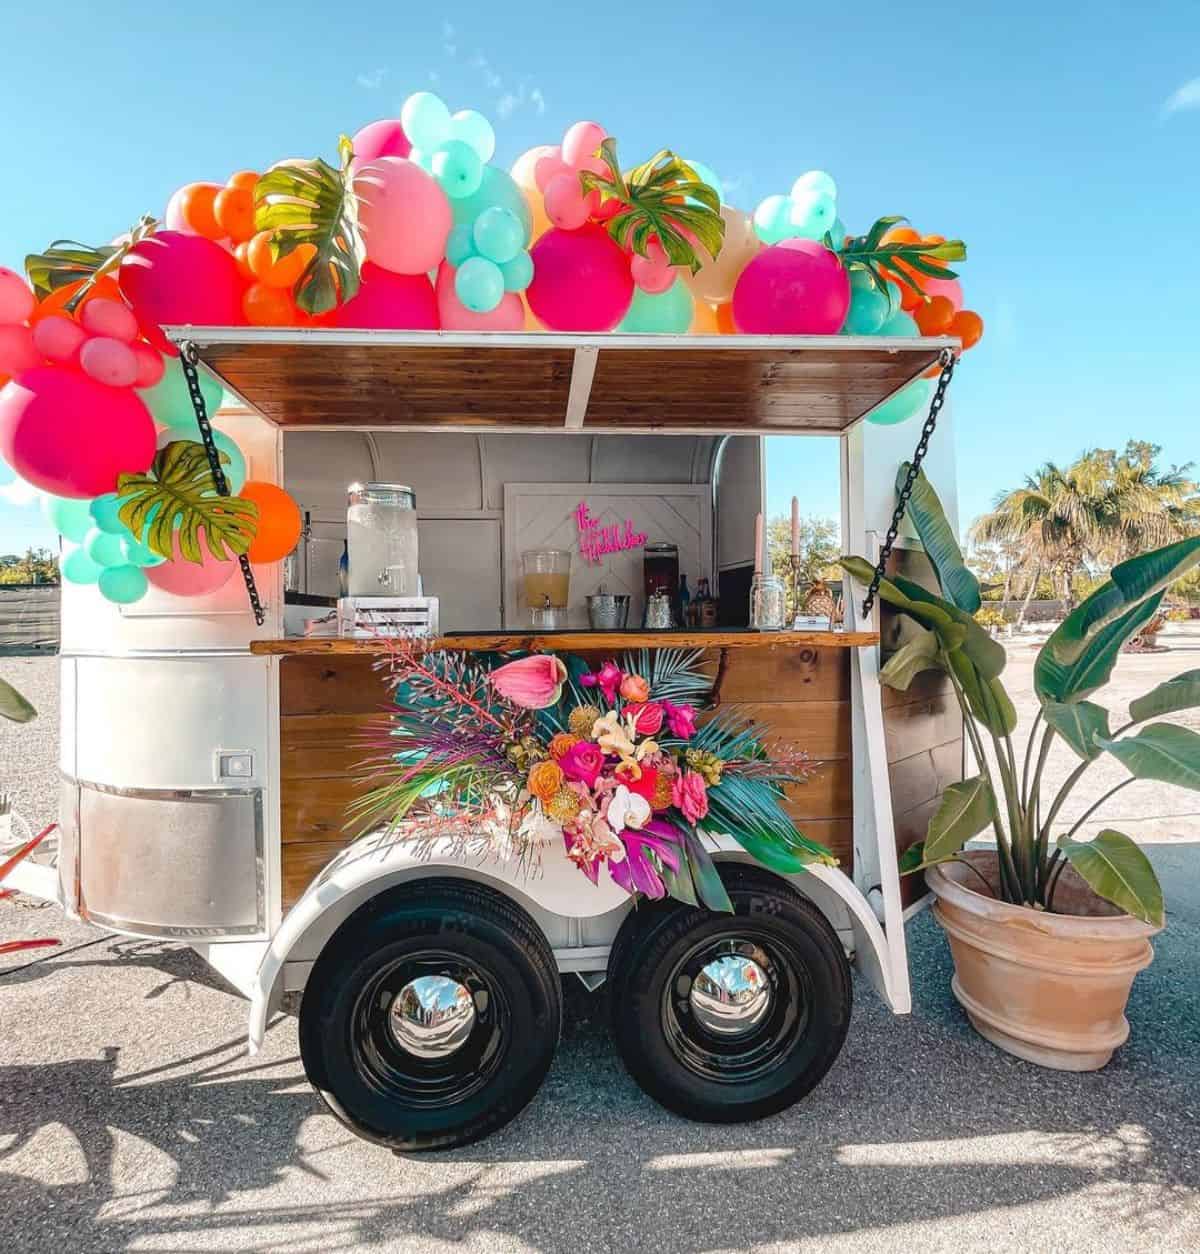 A horse trailer decorated with balloons  rebuilded as a small bar on a beach.